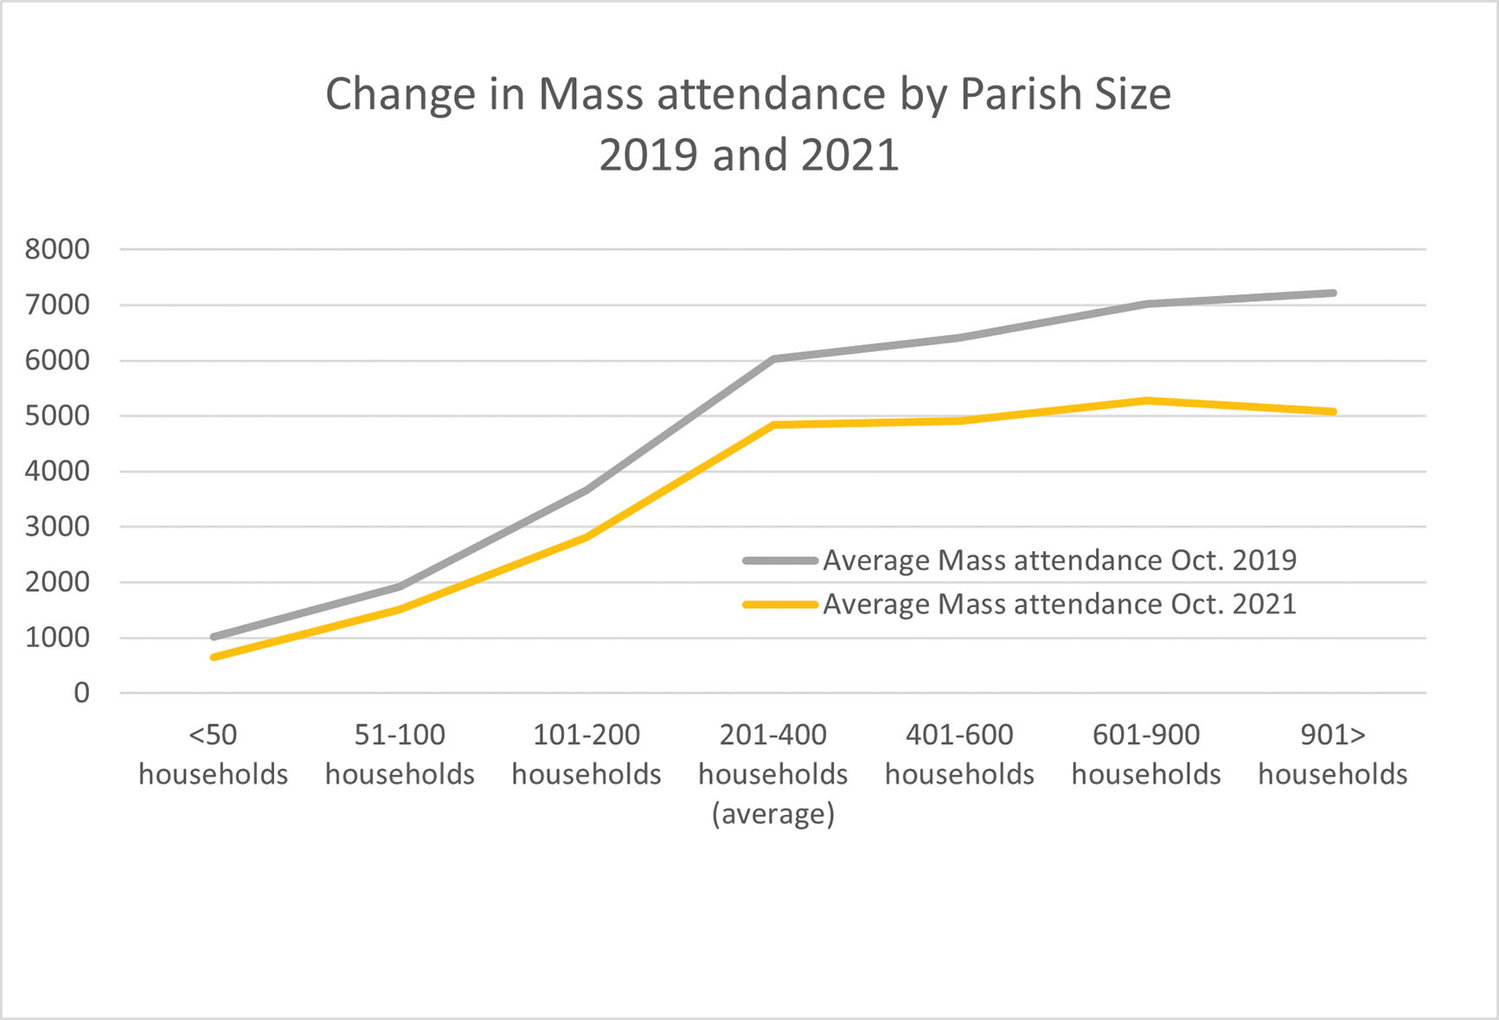 Regardless of a parish’s total number of households, Mass attendance has dropped significantly in the last two years. The diocese did not measure Mass attendance in 2020, during the height of the COVID-19 pandemic and before vaccines were available. While Mass attendance has been steadily declining in the past 20 years, the shift from 2019 to 2021 is the most dramatic for most parishes. On average, the number of people attending Mass in October 2021 was 24% less than October 2019. Spanish language Masses saw a 16% decrease.